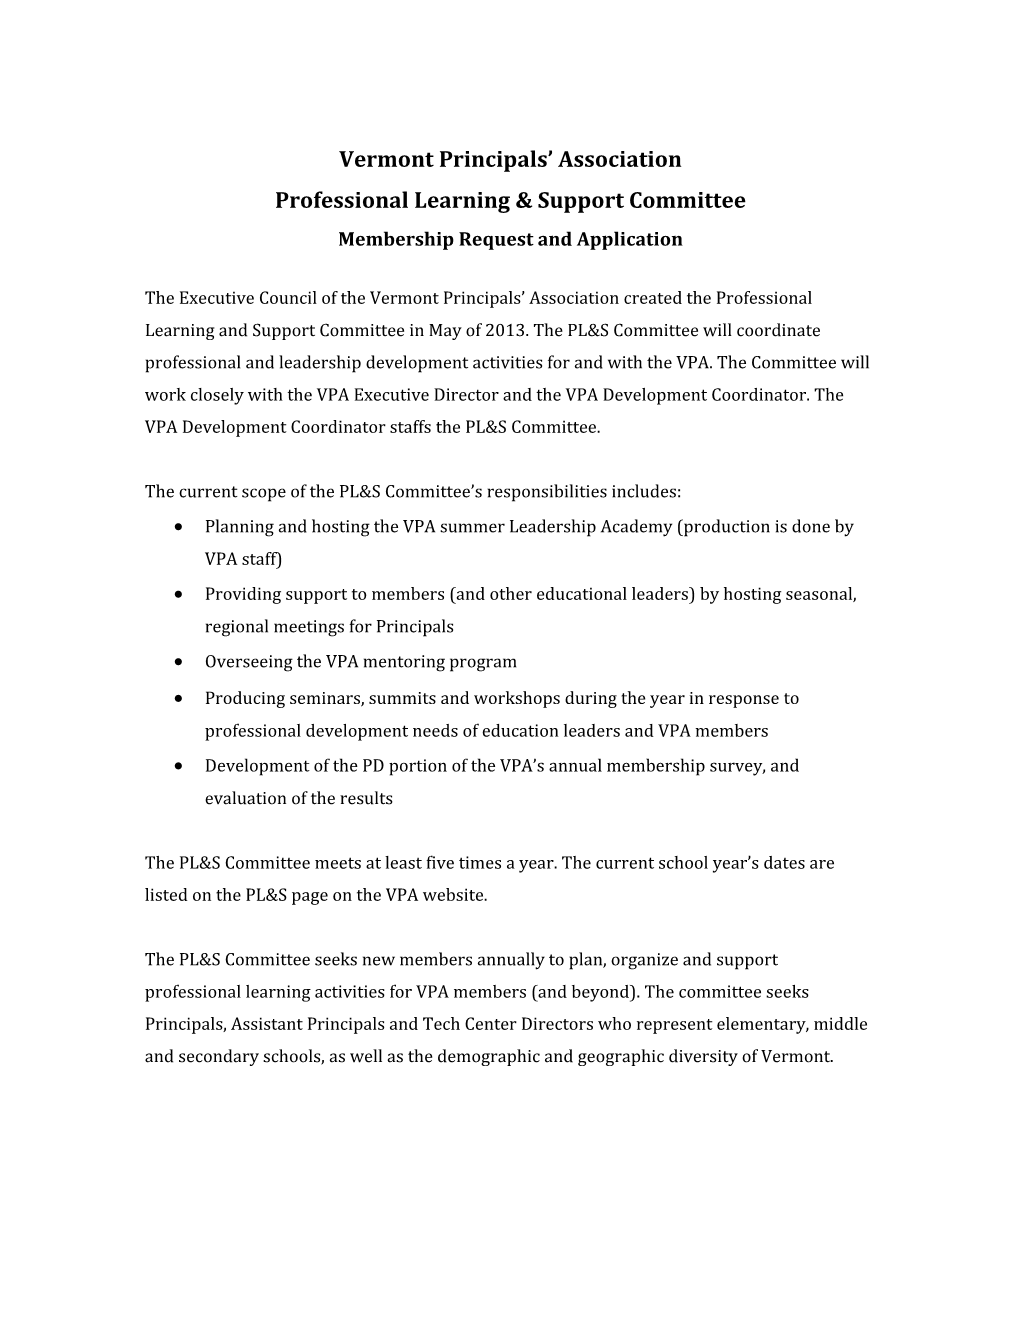 Professional Learning & Support Committee